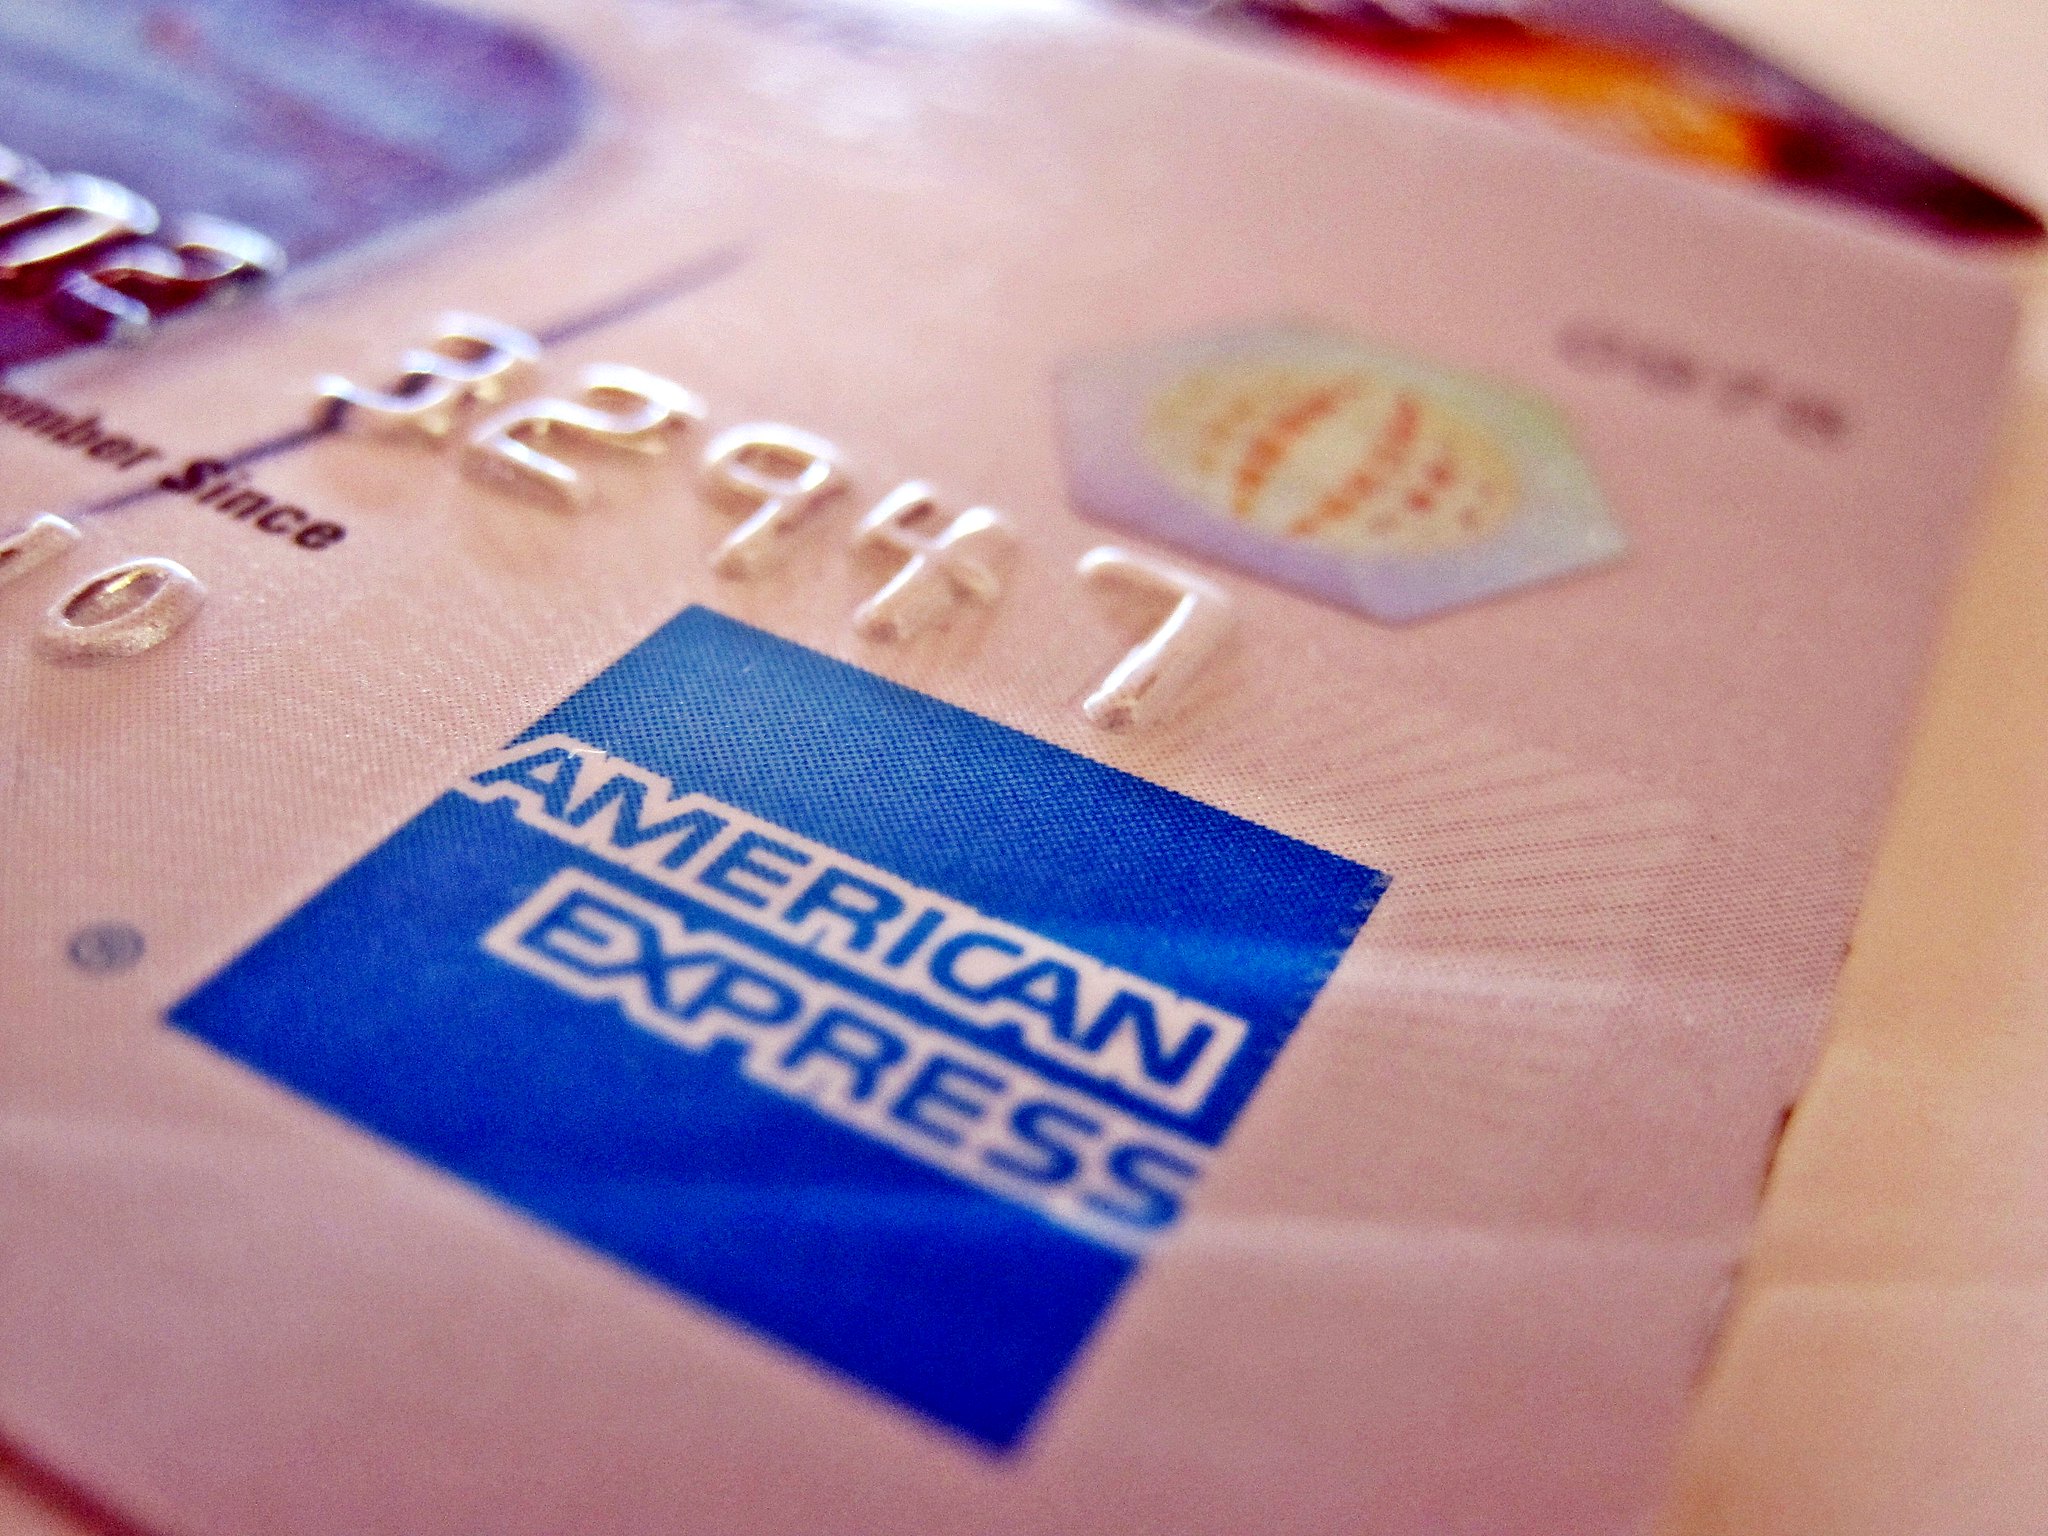 American Express Preps for Downturn Despite Boost From Travel Spending